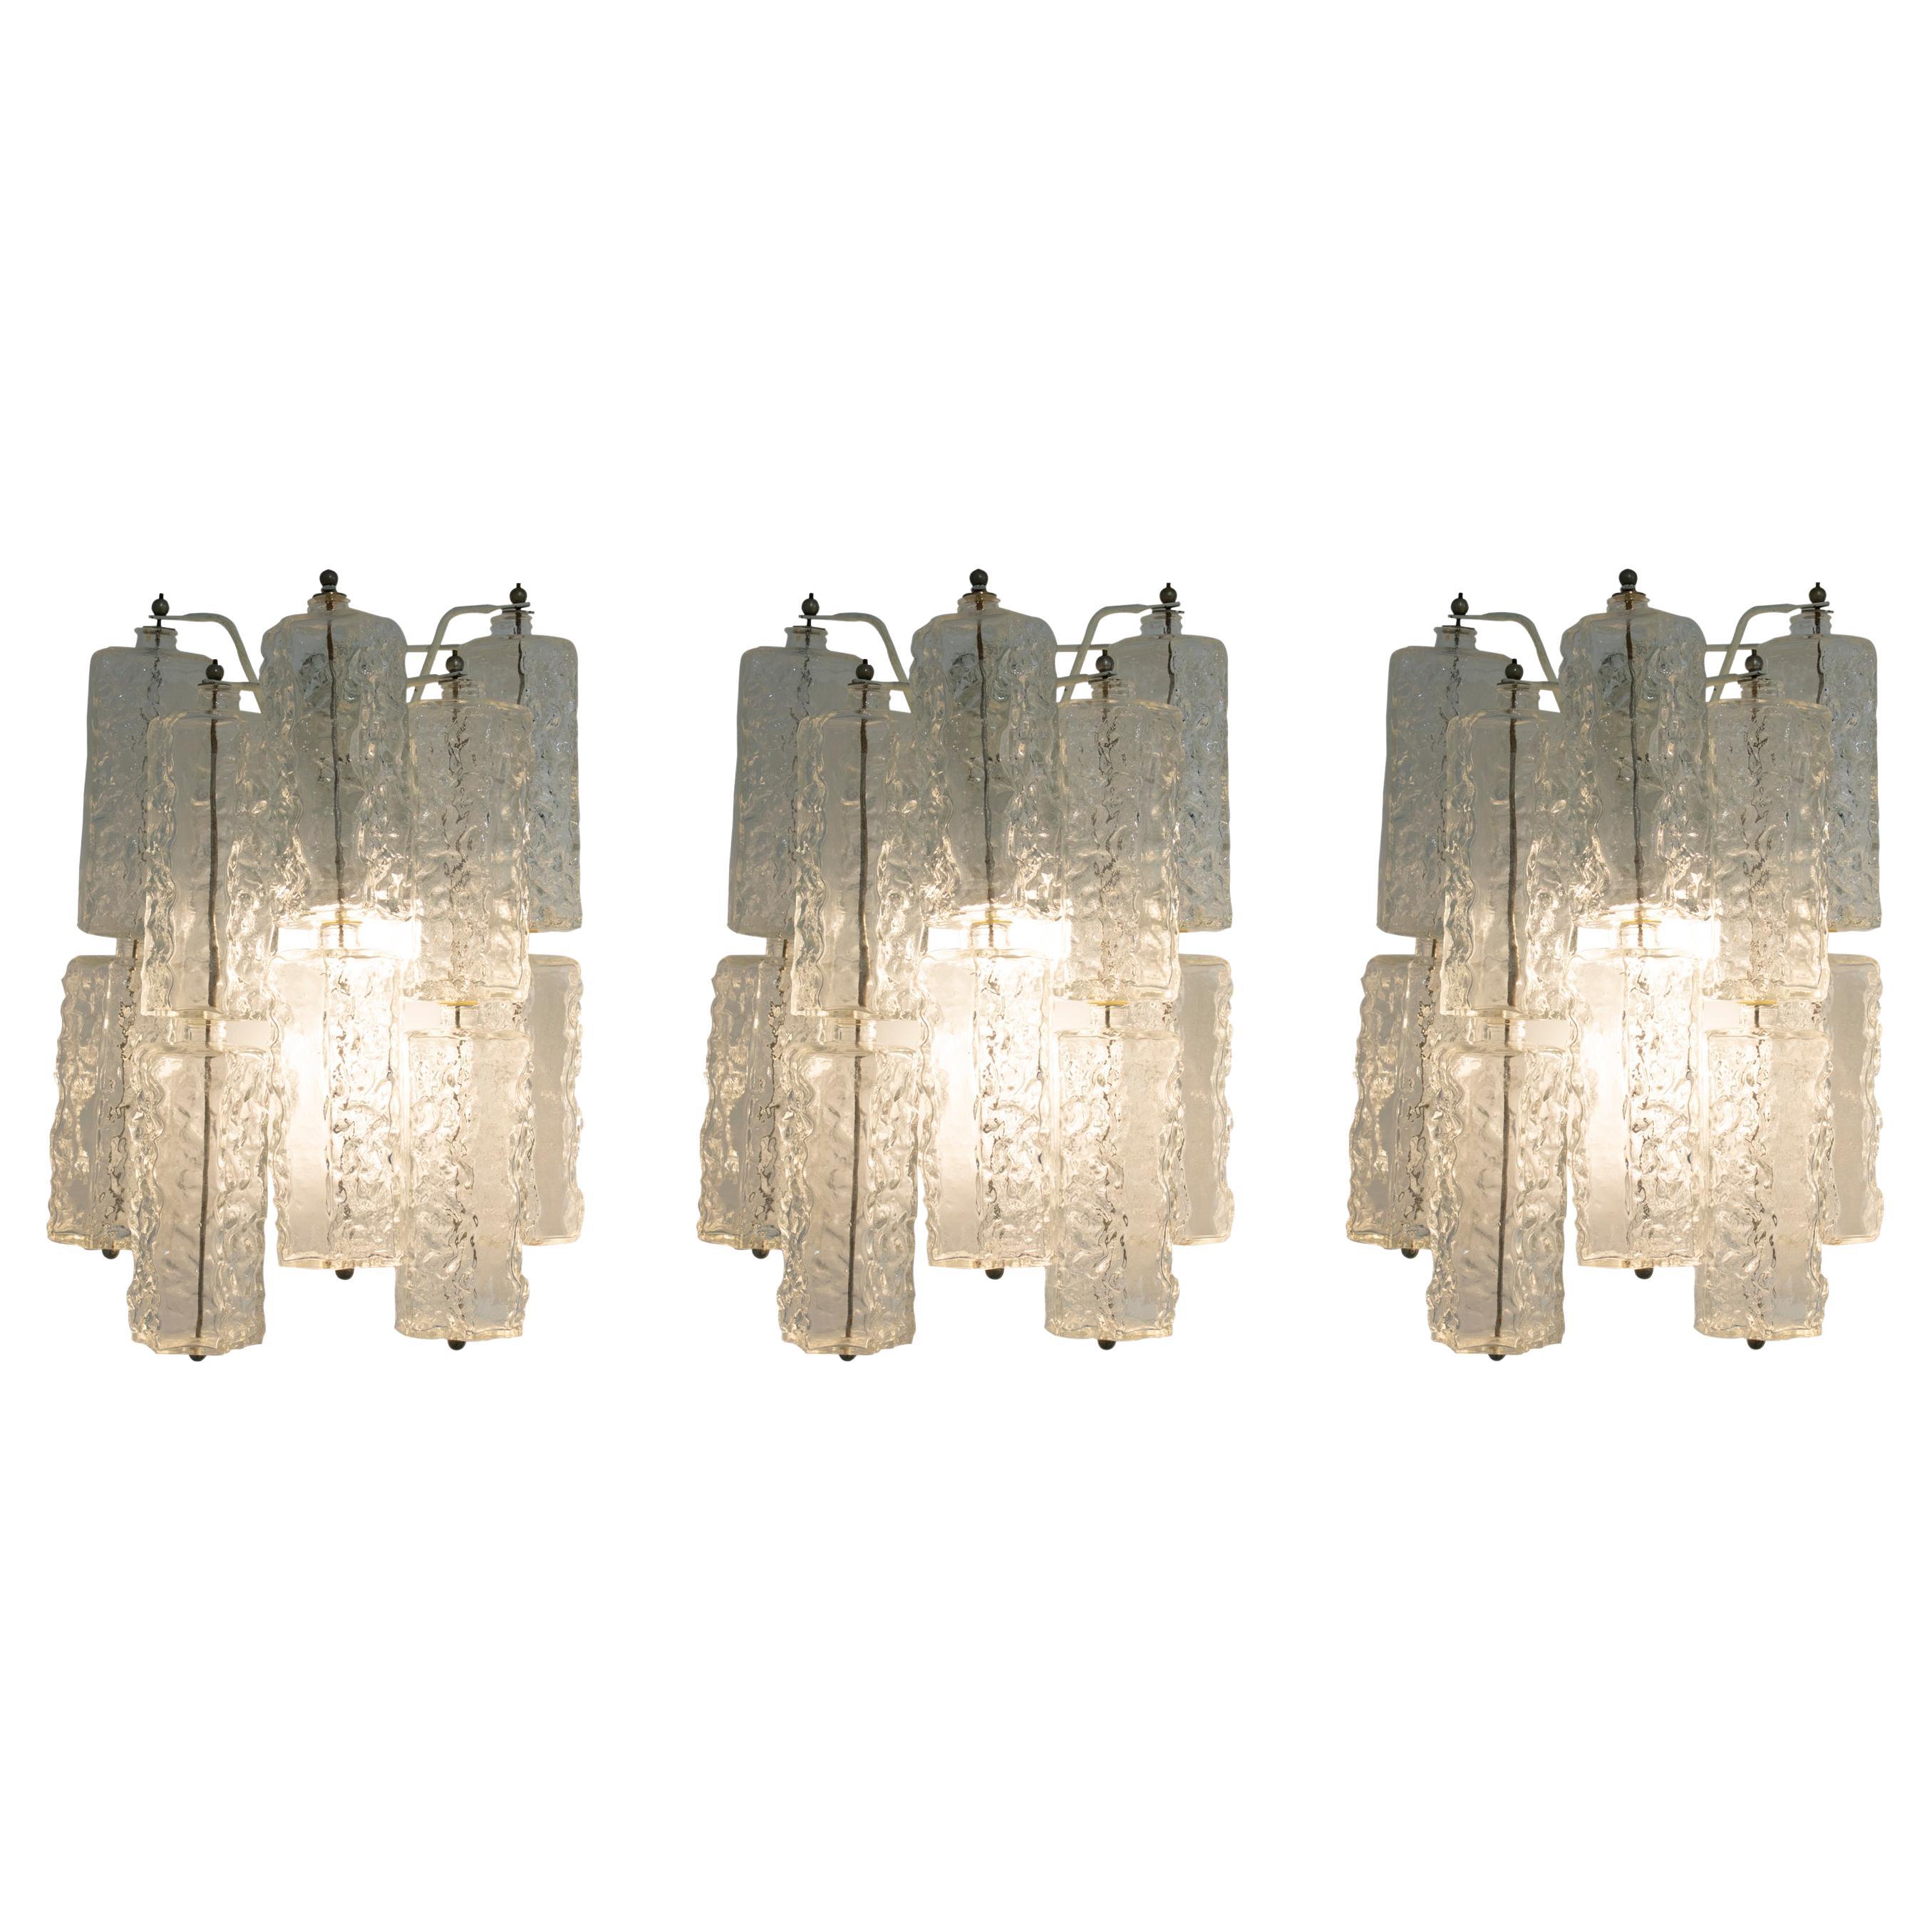 Set of three handmade transparent Venini glass wall lamps. 
Each lamp consists of 10 individual pentagonal prisms glass pieces and a lacquered metal structure and details.